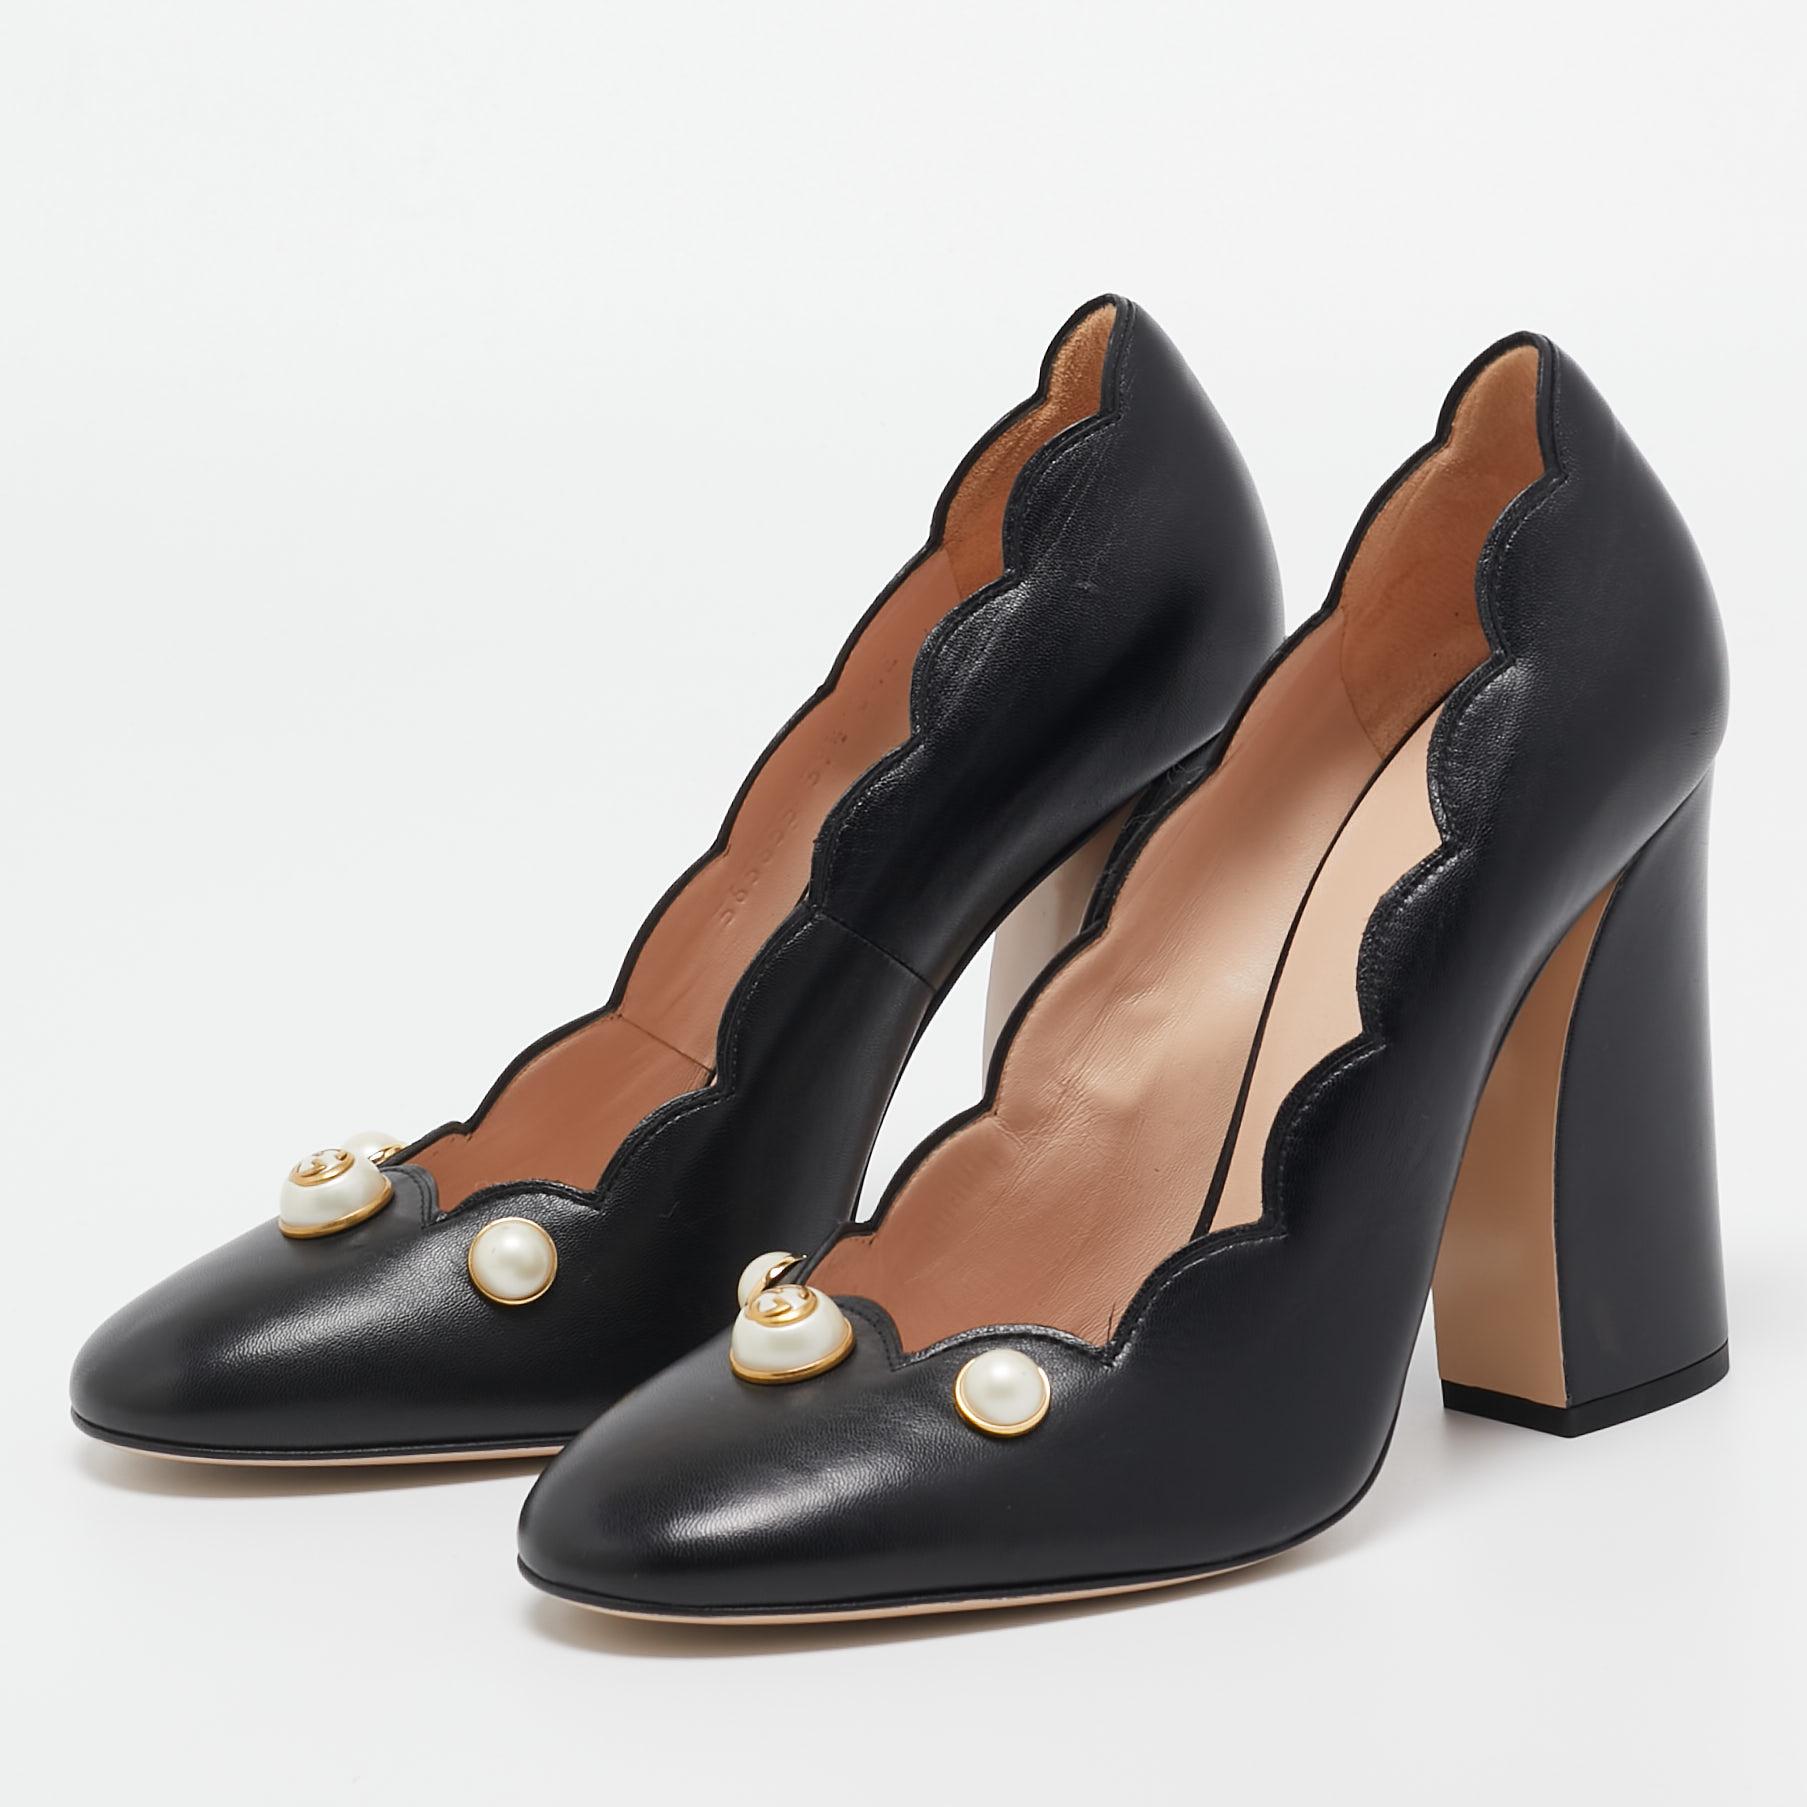 Exhibit an elegant style with this pair of pumps. These designer pumps are crafted from quality materials. They are set on durable soles and block heels.

